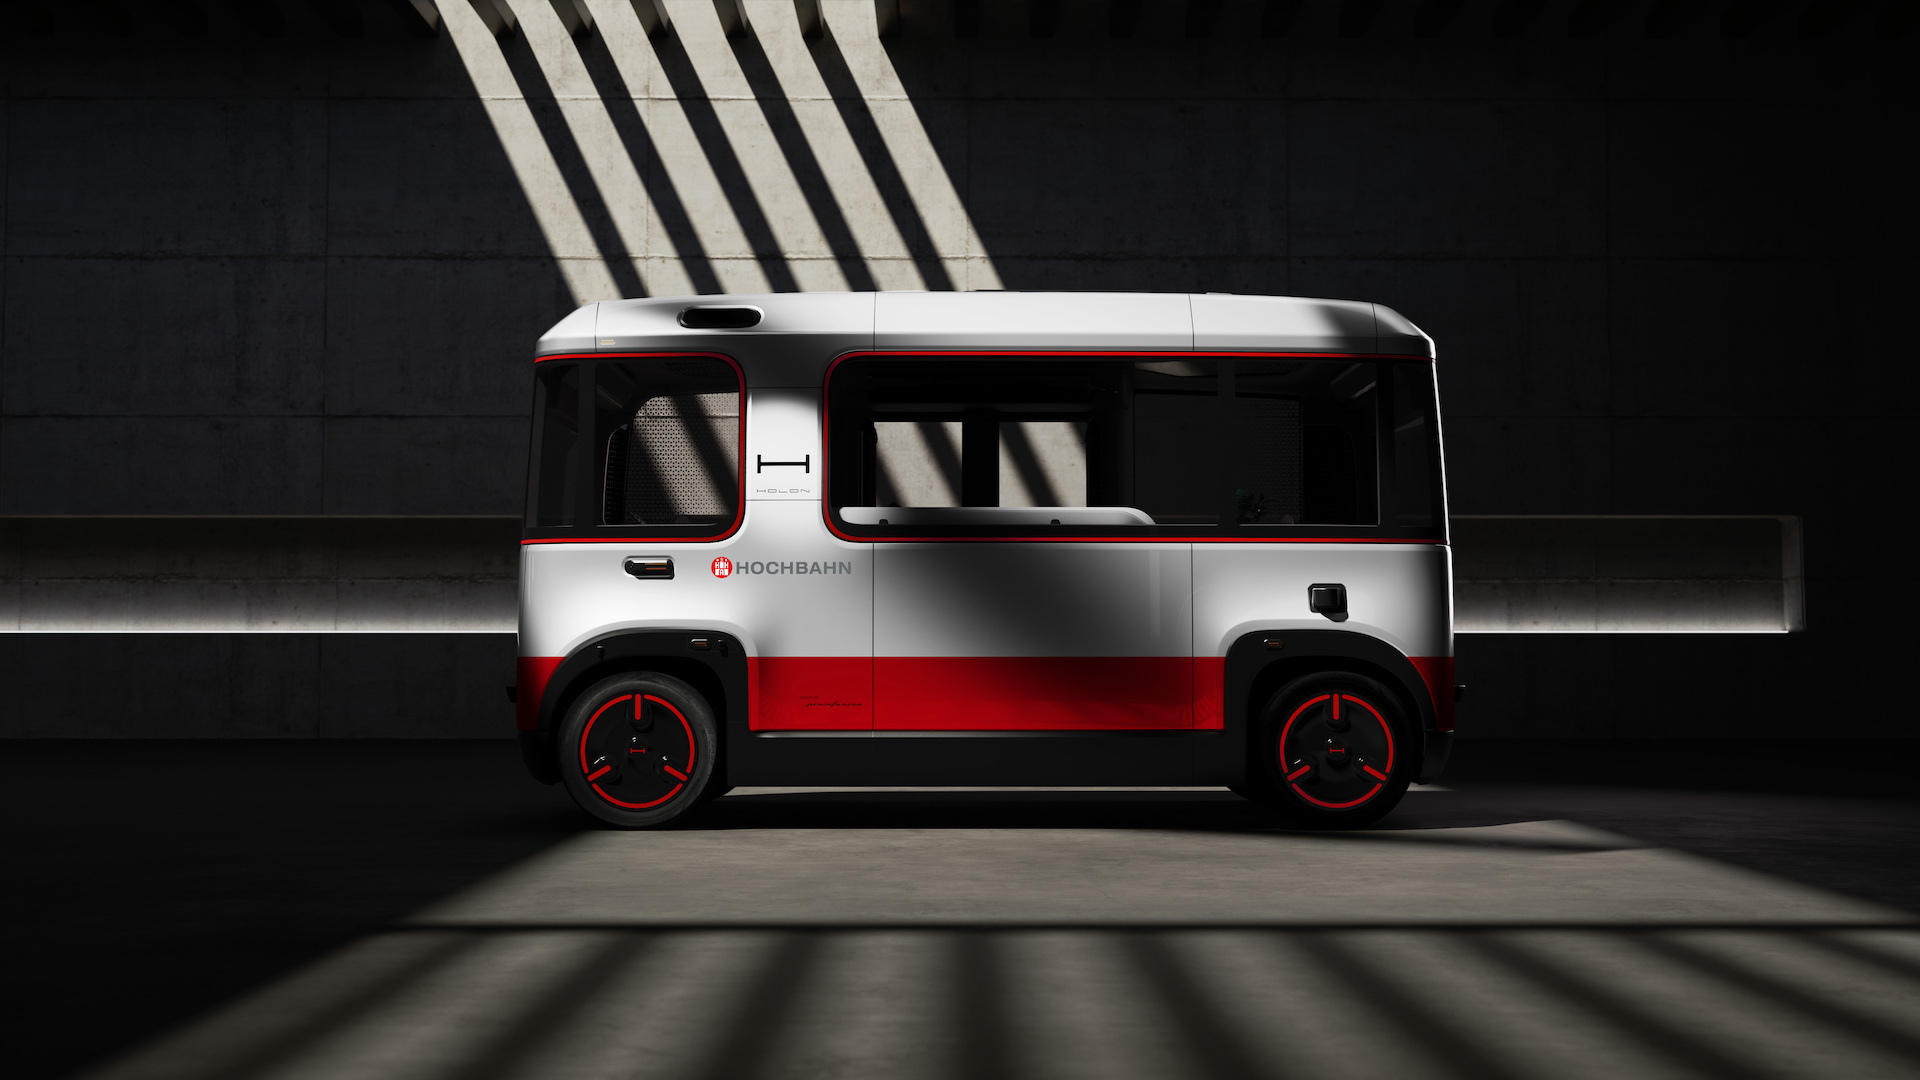 Project ALIKE aims for 10,000 Autonomous Electric Shuttles in Hamburg by 2030